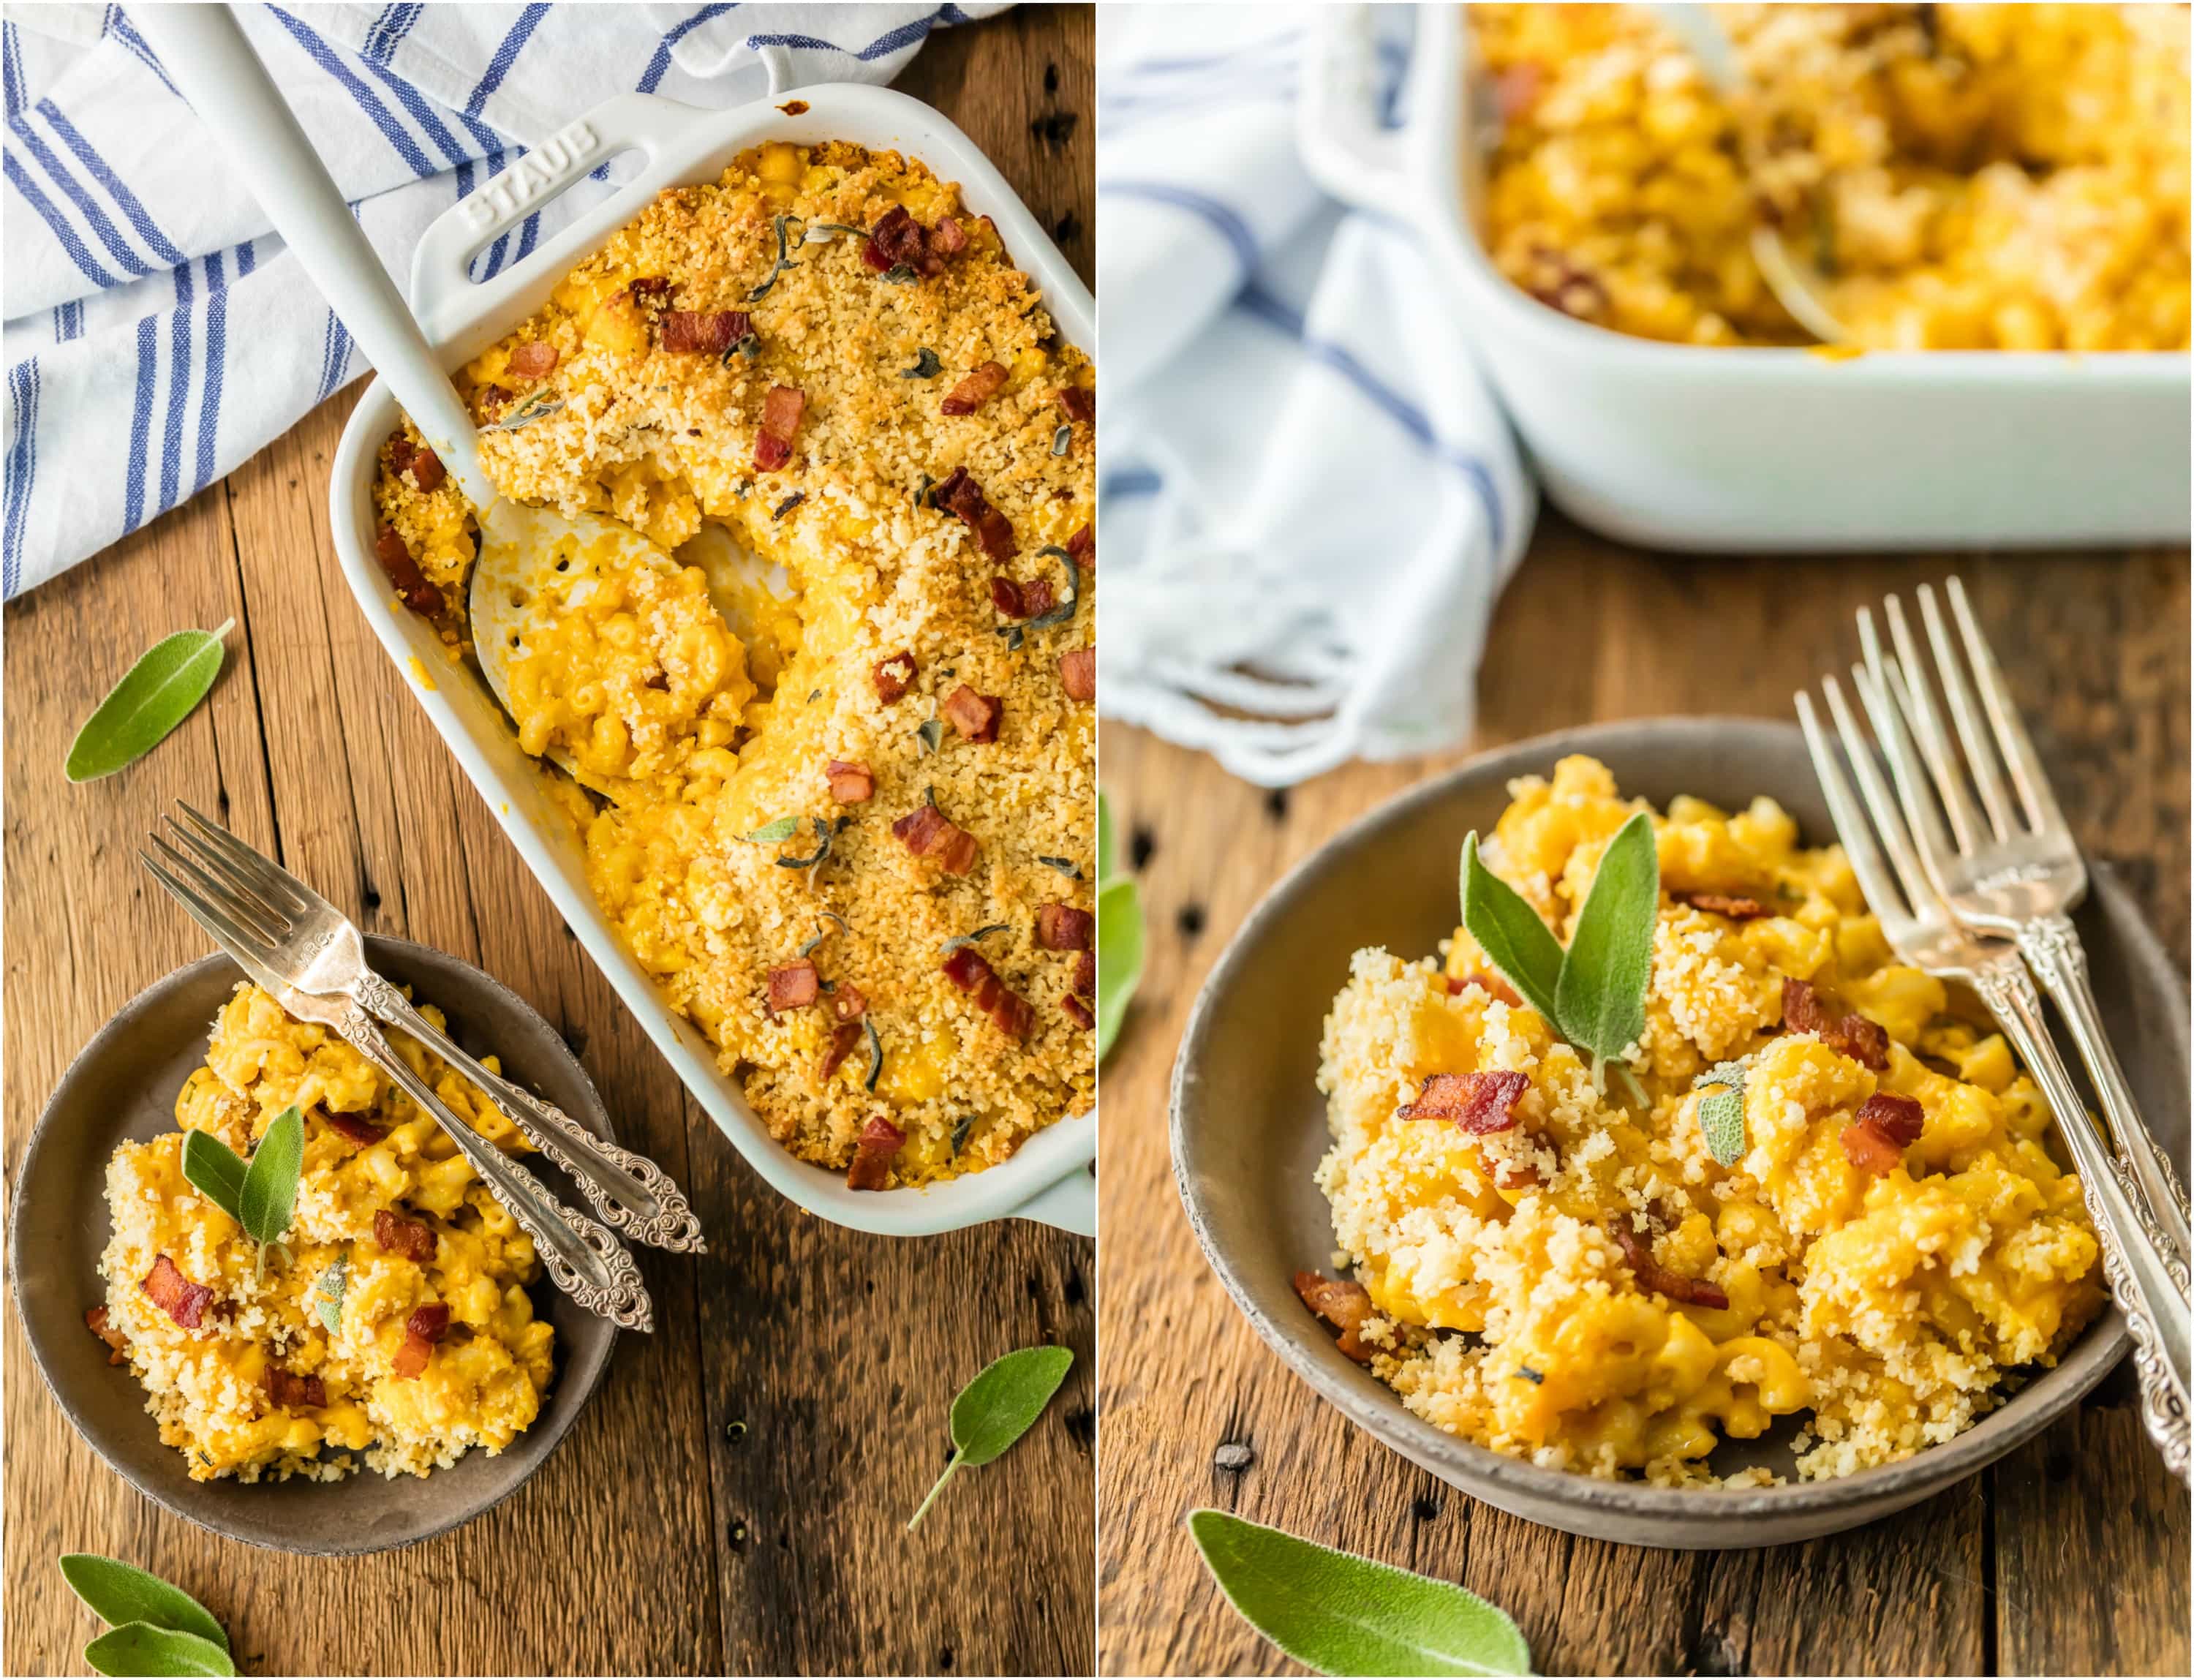 Baked Pumpkin Bacon Mac and Cheese is the ULTIMATE comfort food for Fall! Autumn in a casserole dish! Loaded with cheese, bacon, pumpkin, sage, and more cheese. BEST MACARONI AND CHEESE EVER!